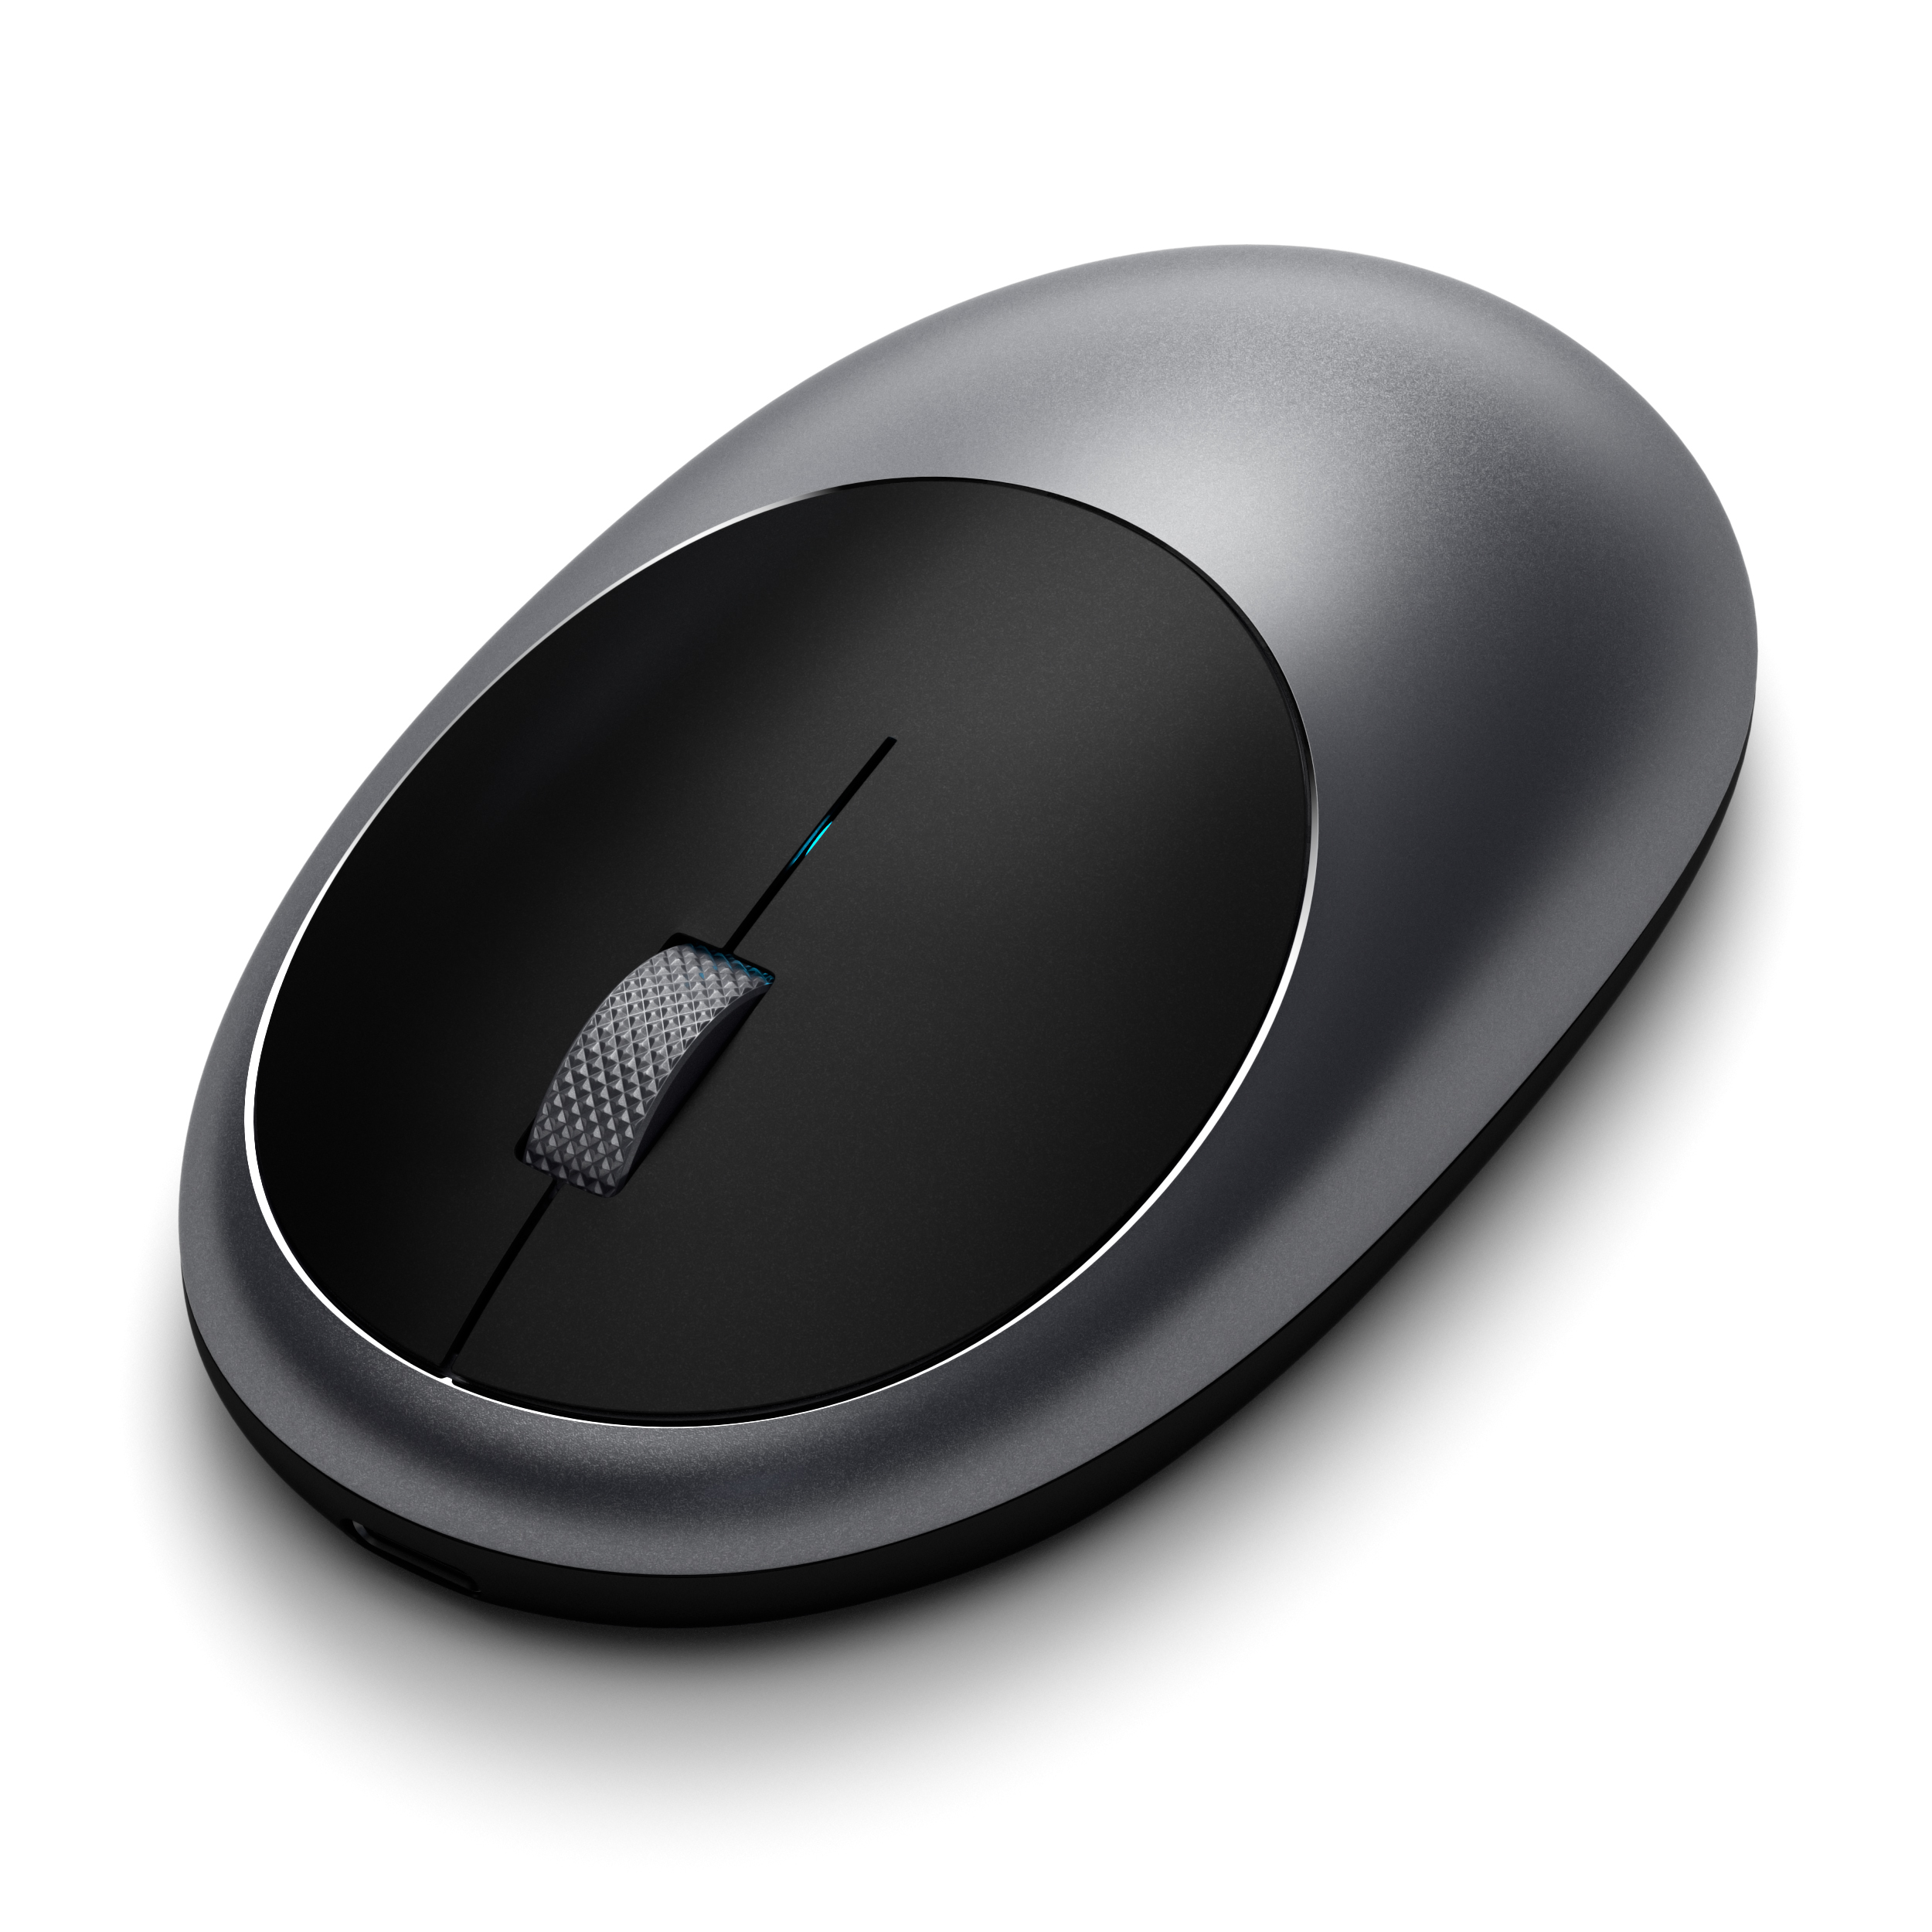 SATECHI M1 Maus, Grey Mouse Space Wireless Bluetooth Grey - Space